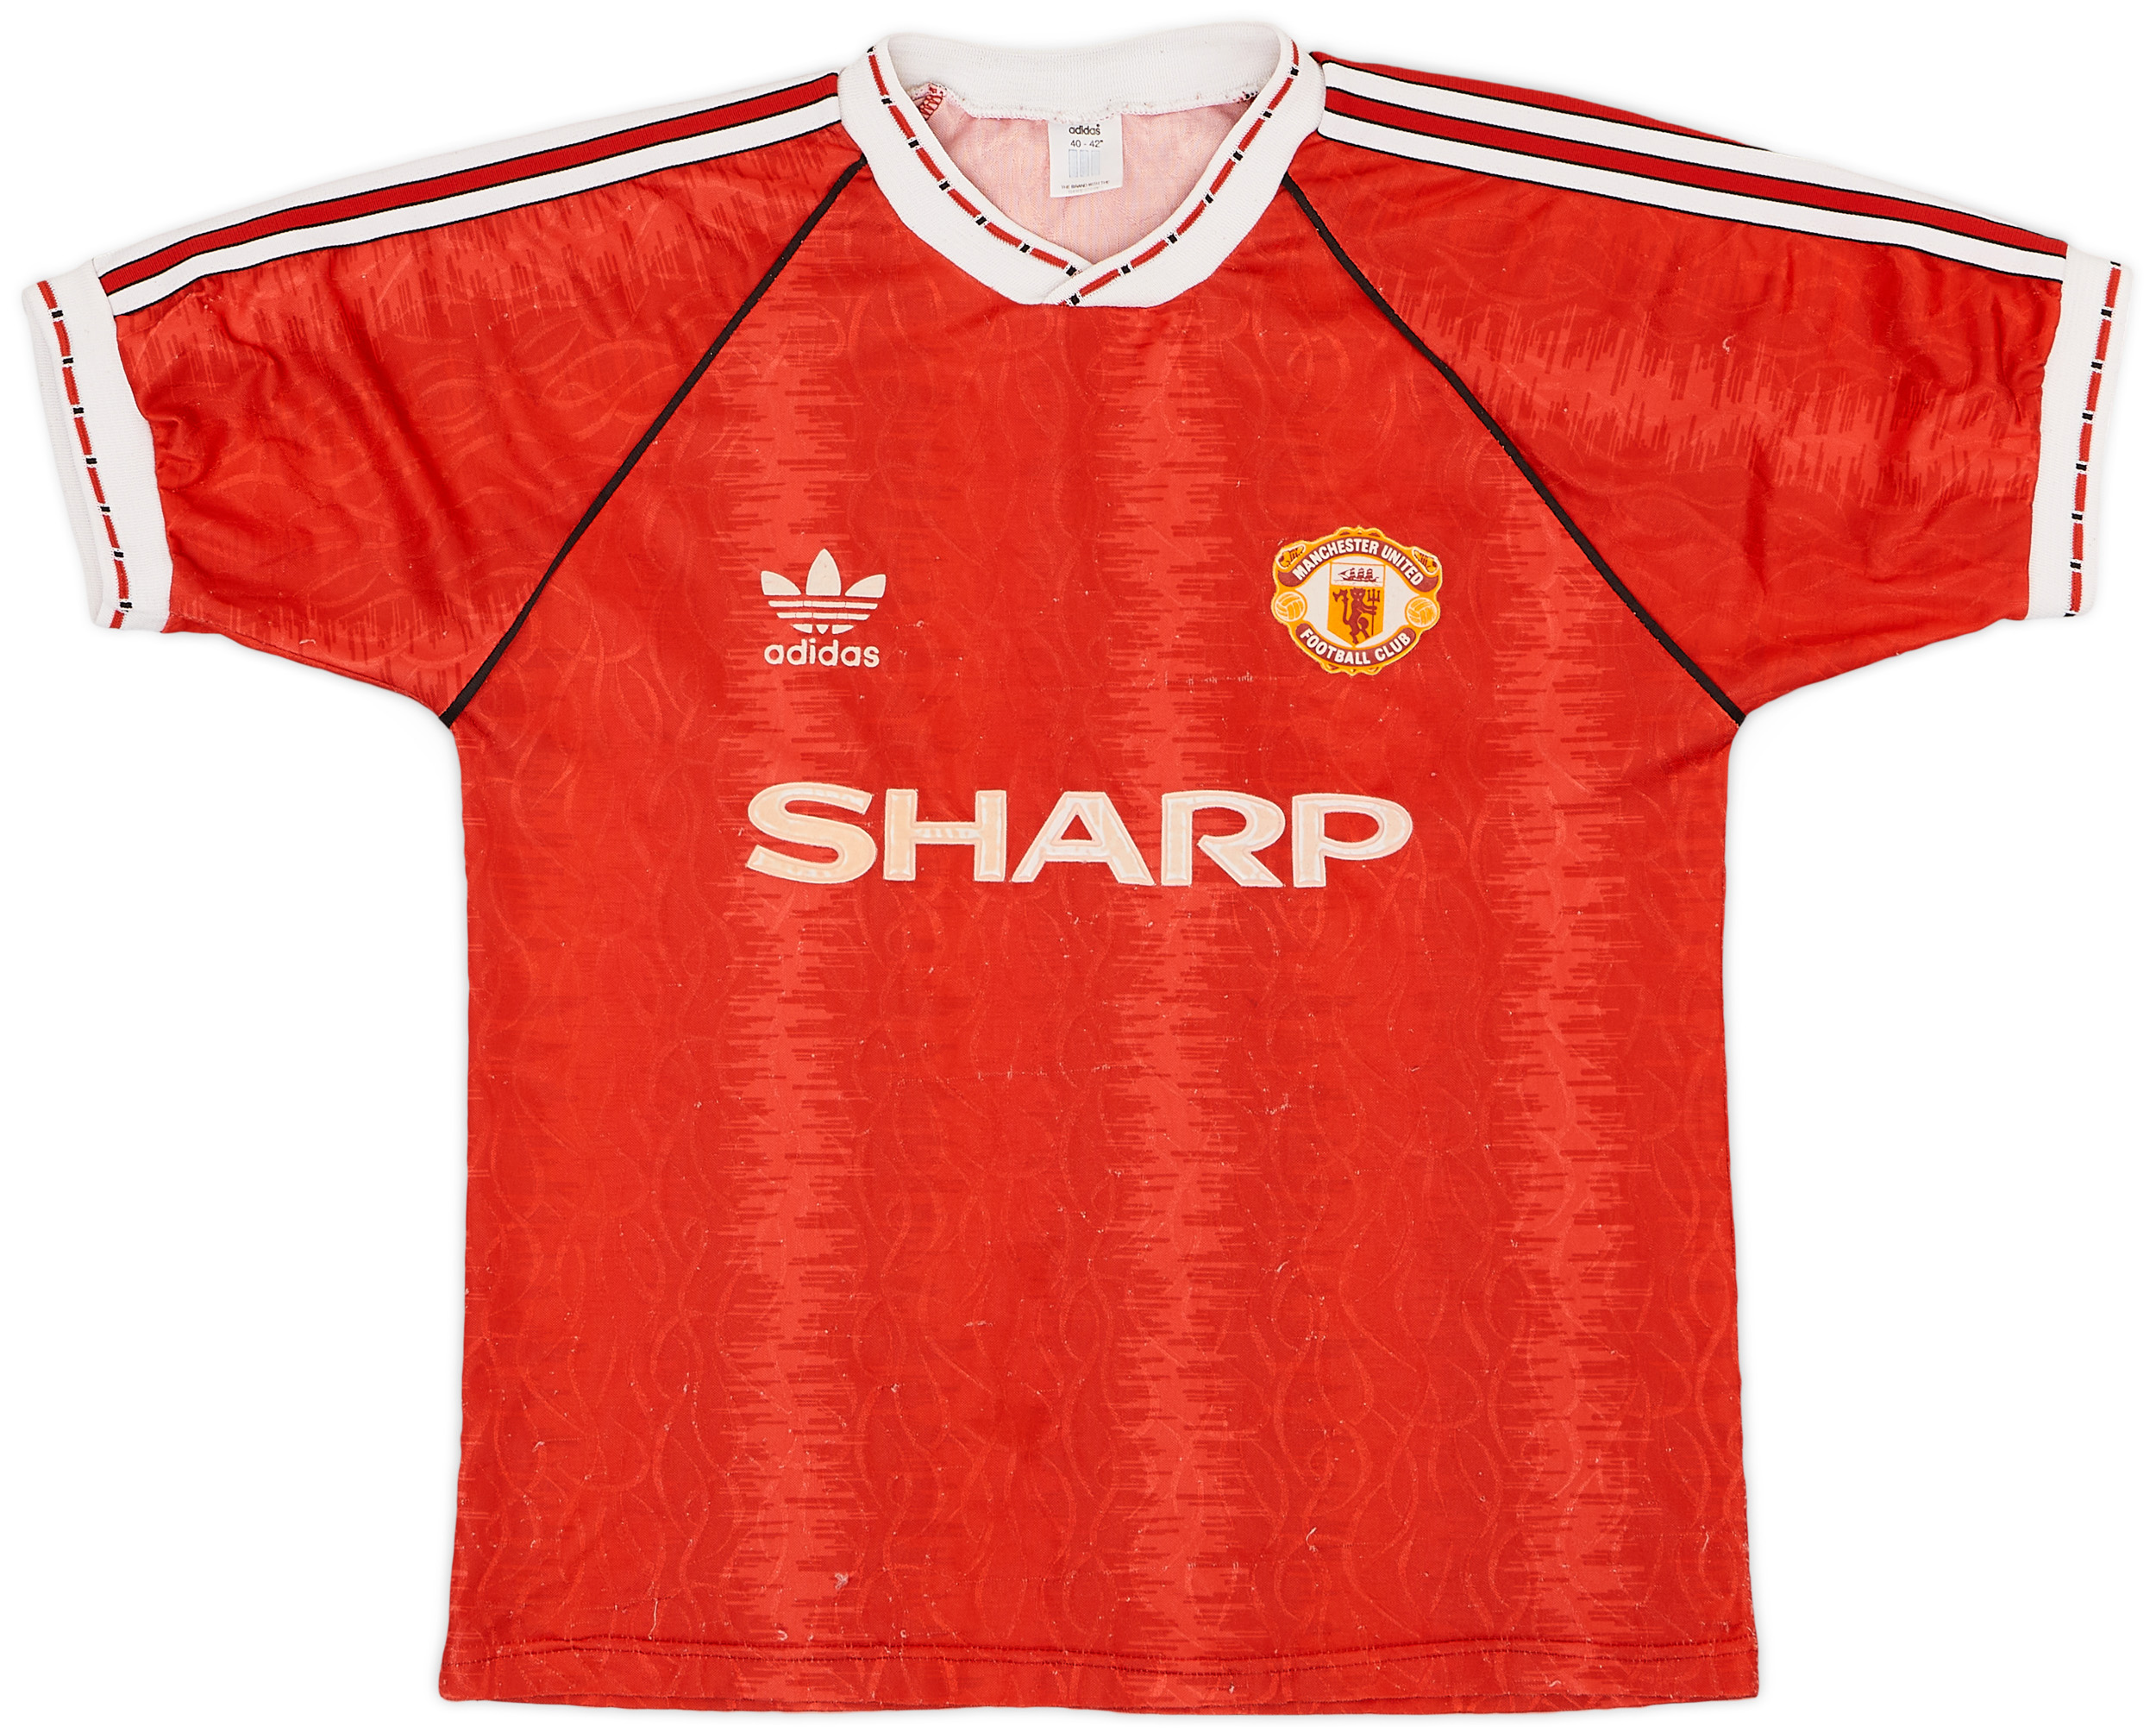 1990-92 Manchester United Home Shirt - 6/10 - (/)